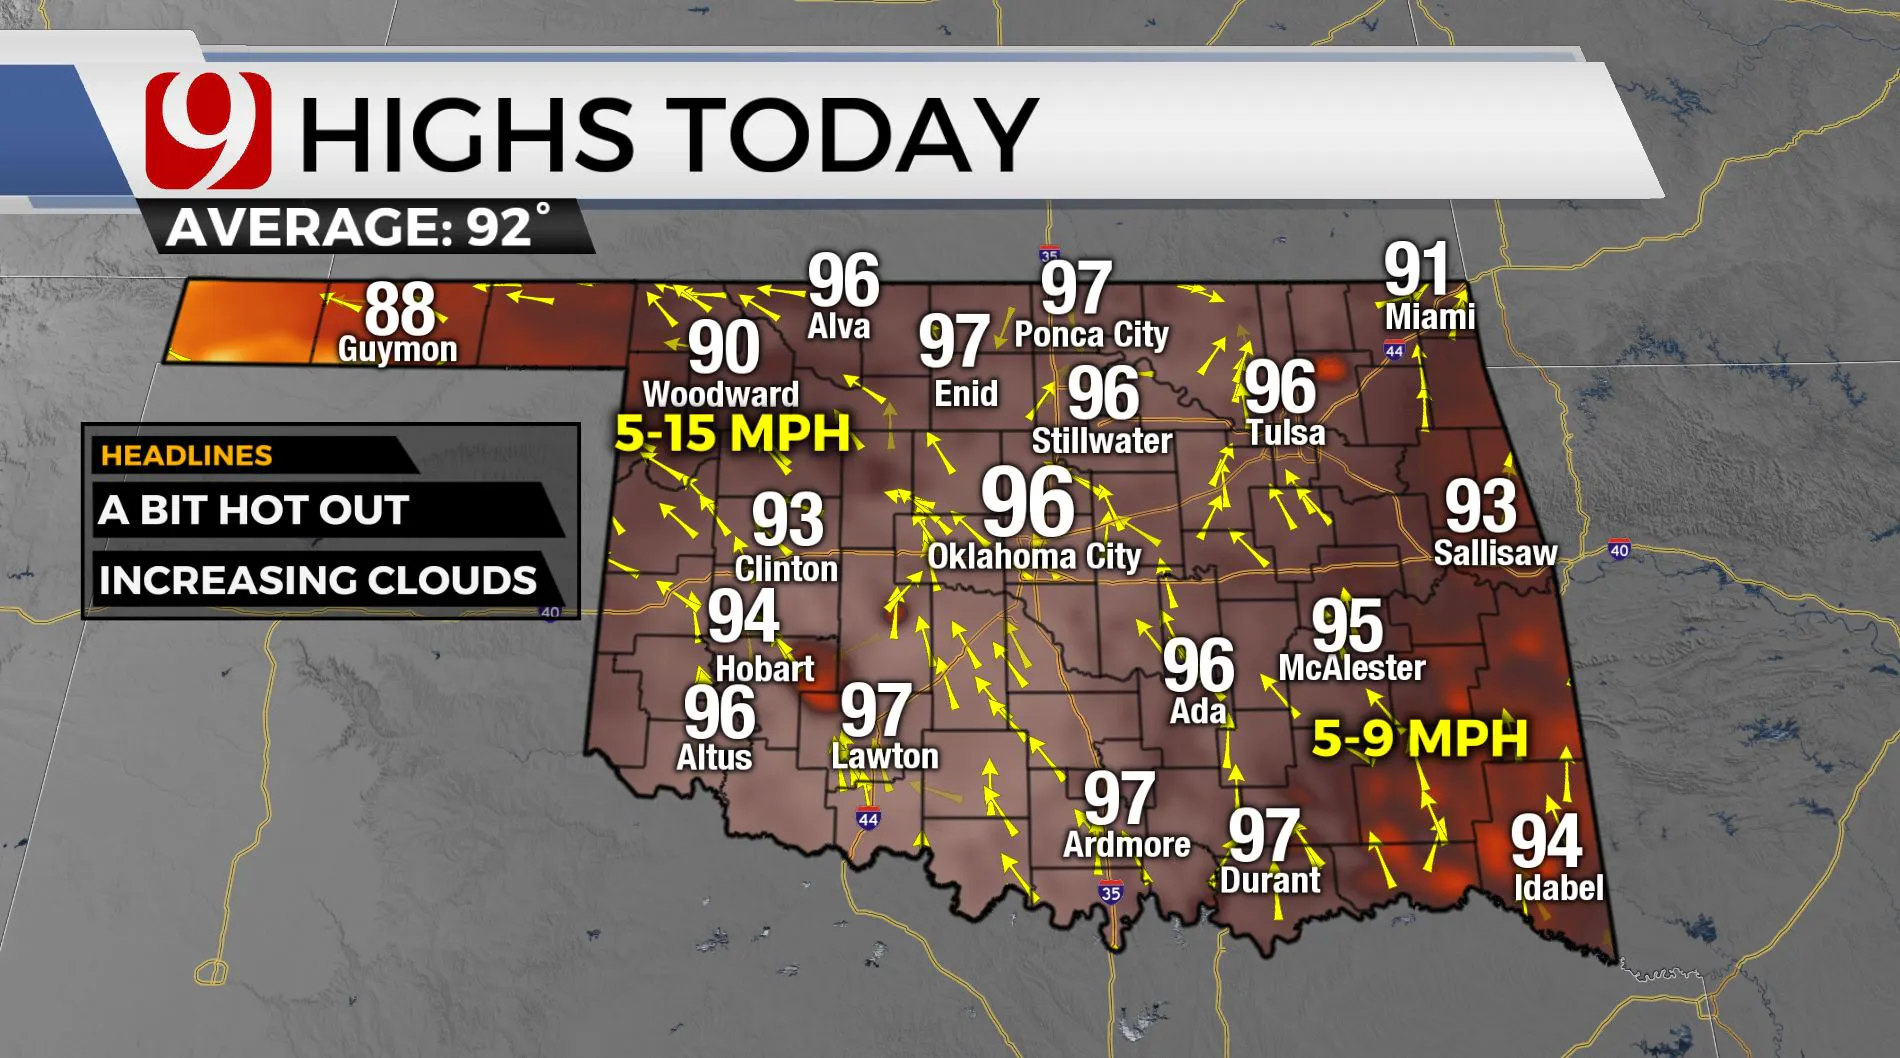 HIGHS TODAY 8/20/22